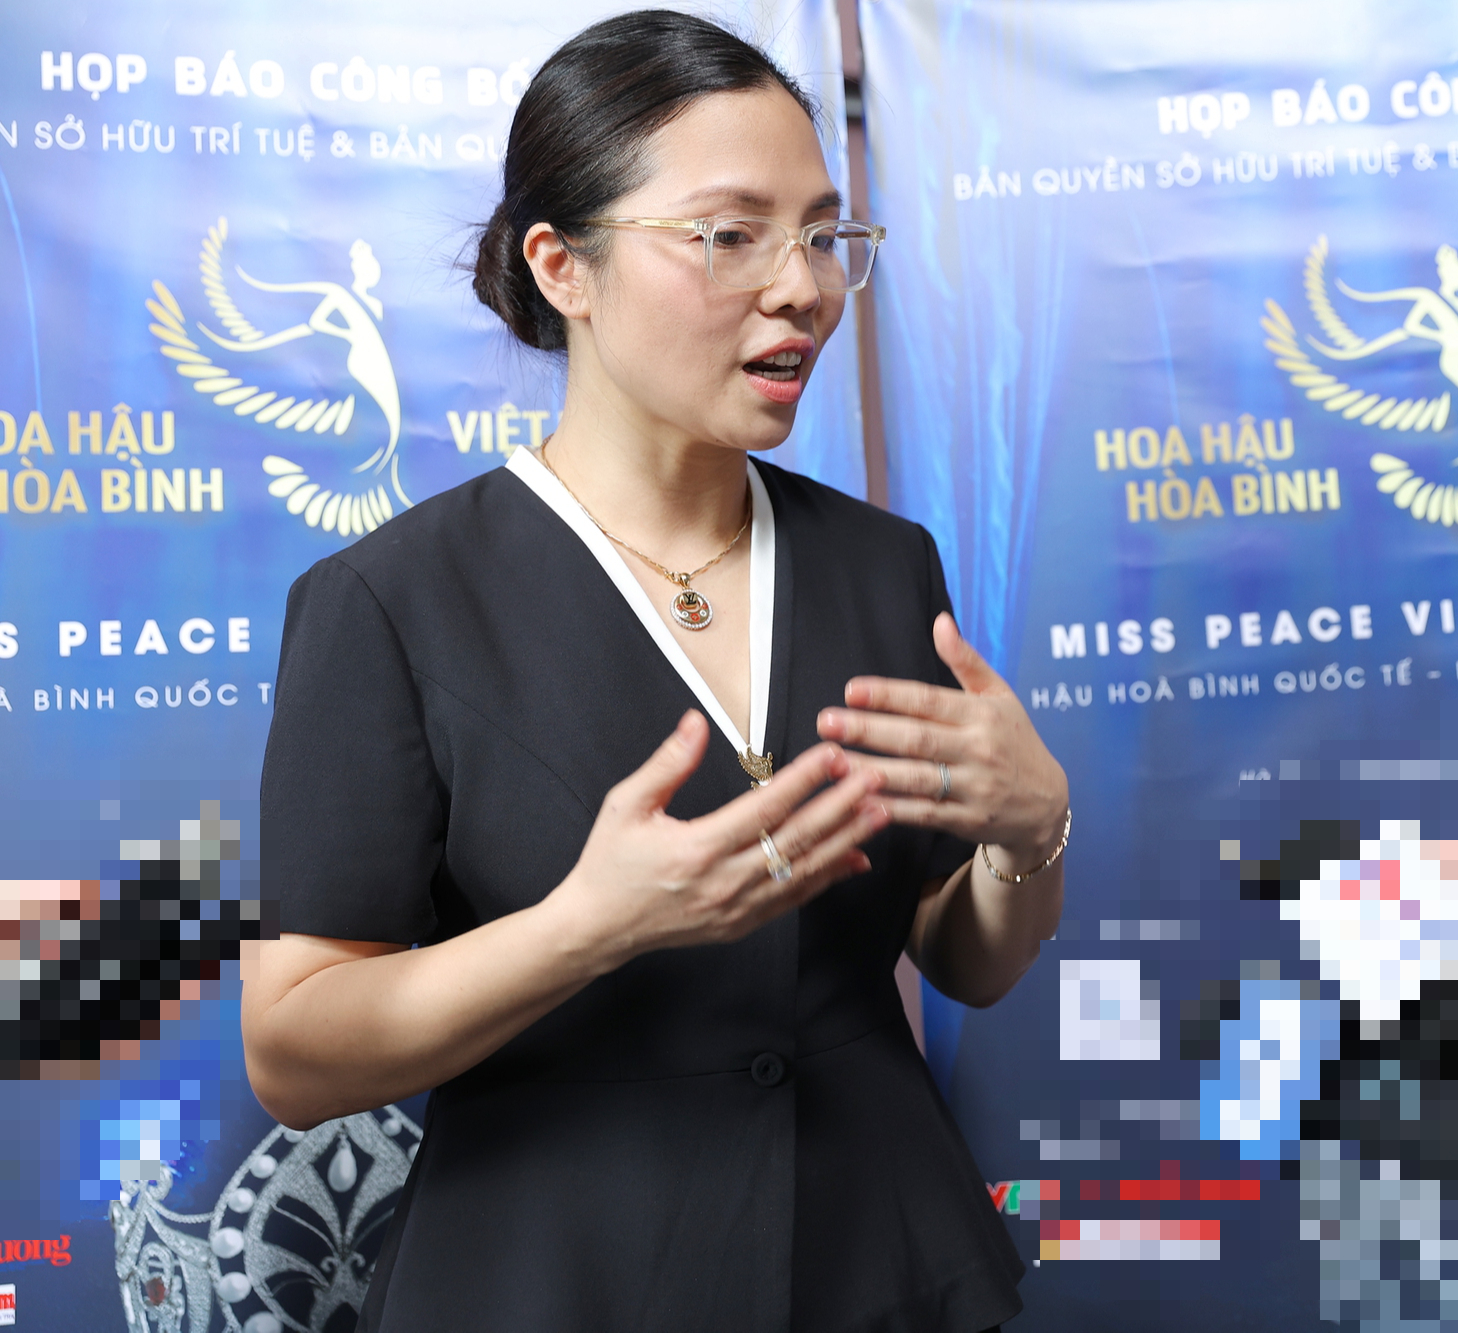 Controversy over the name of Miss Peace Vietnam: The latest details are announced - Photo 1.